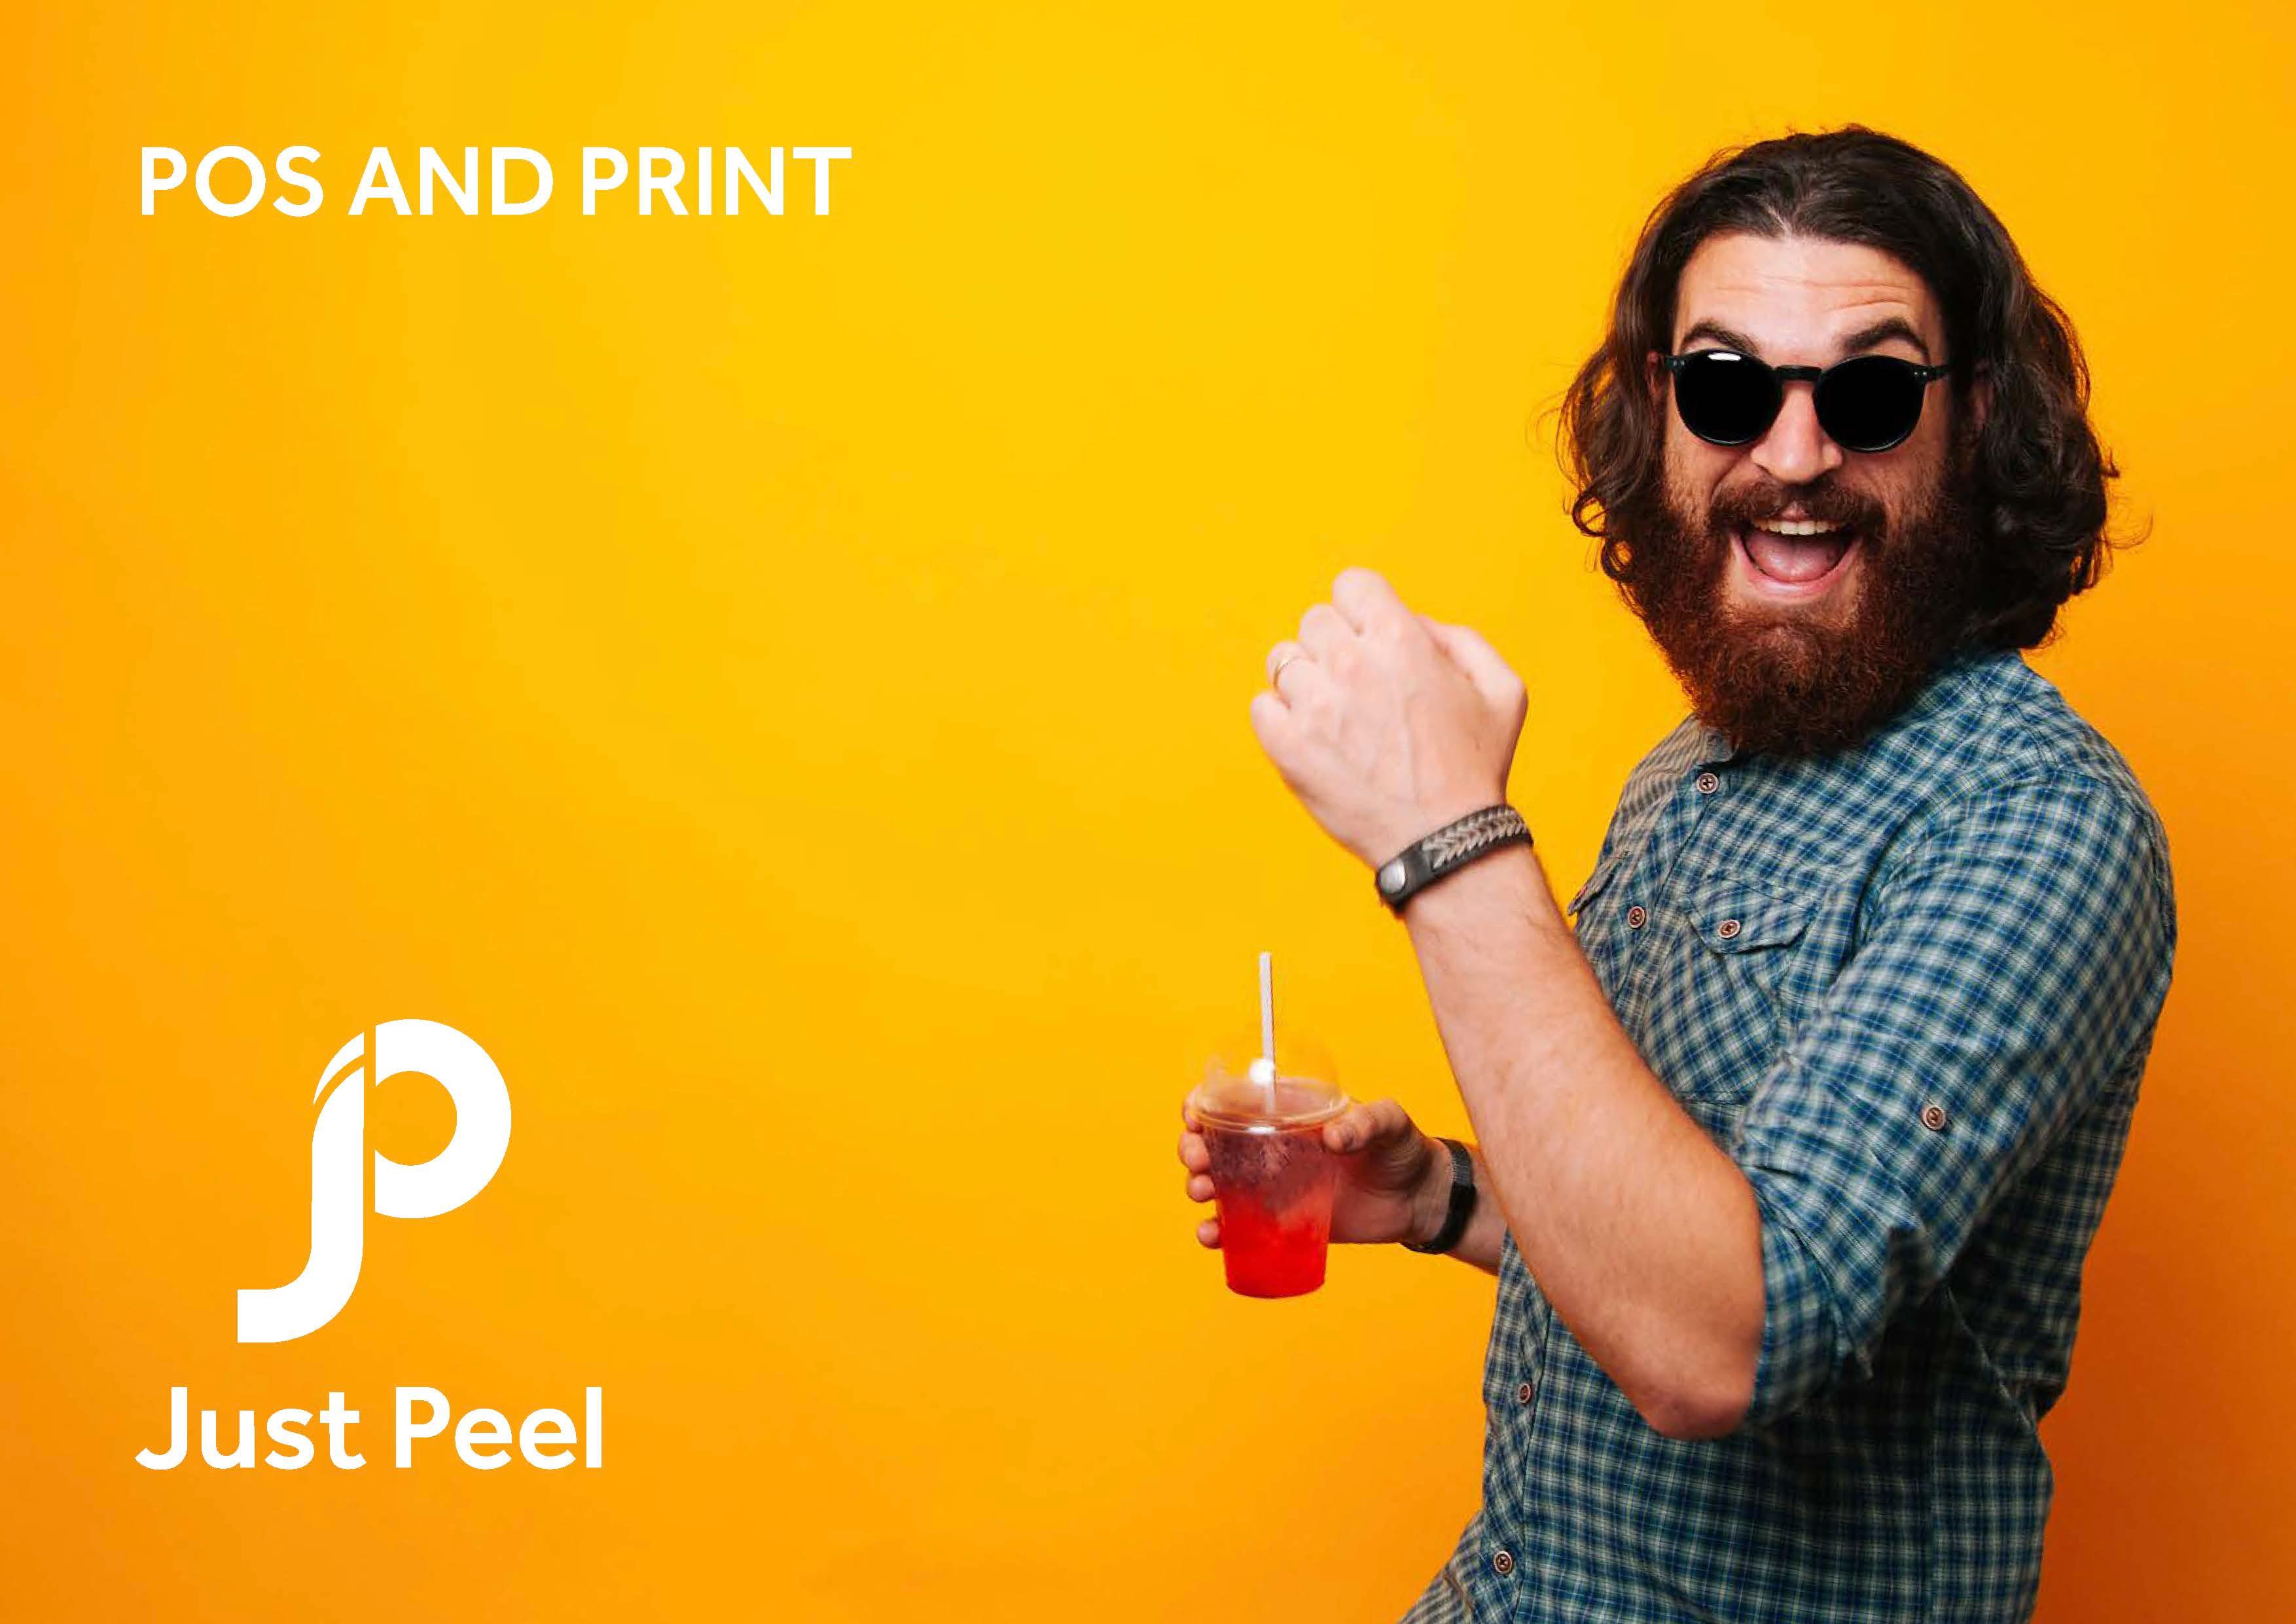 Product Point of Sale - Just Peel image